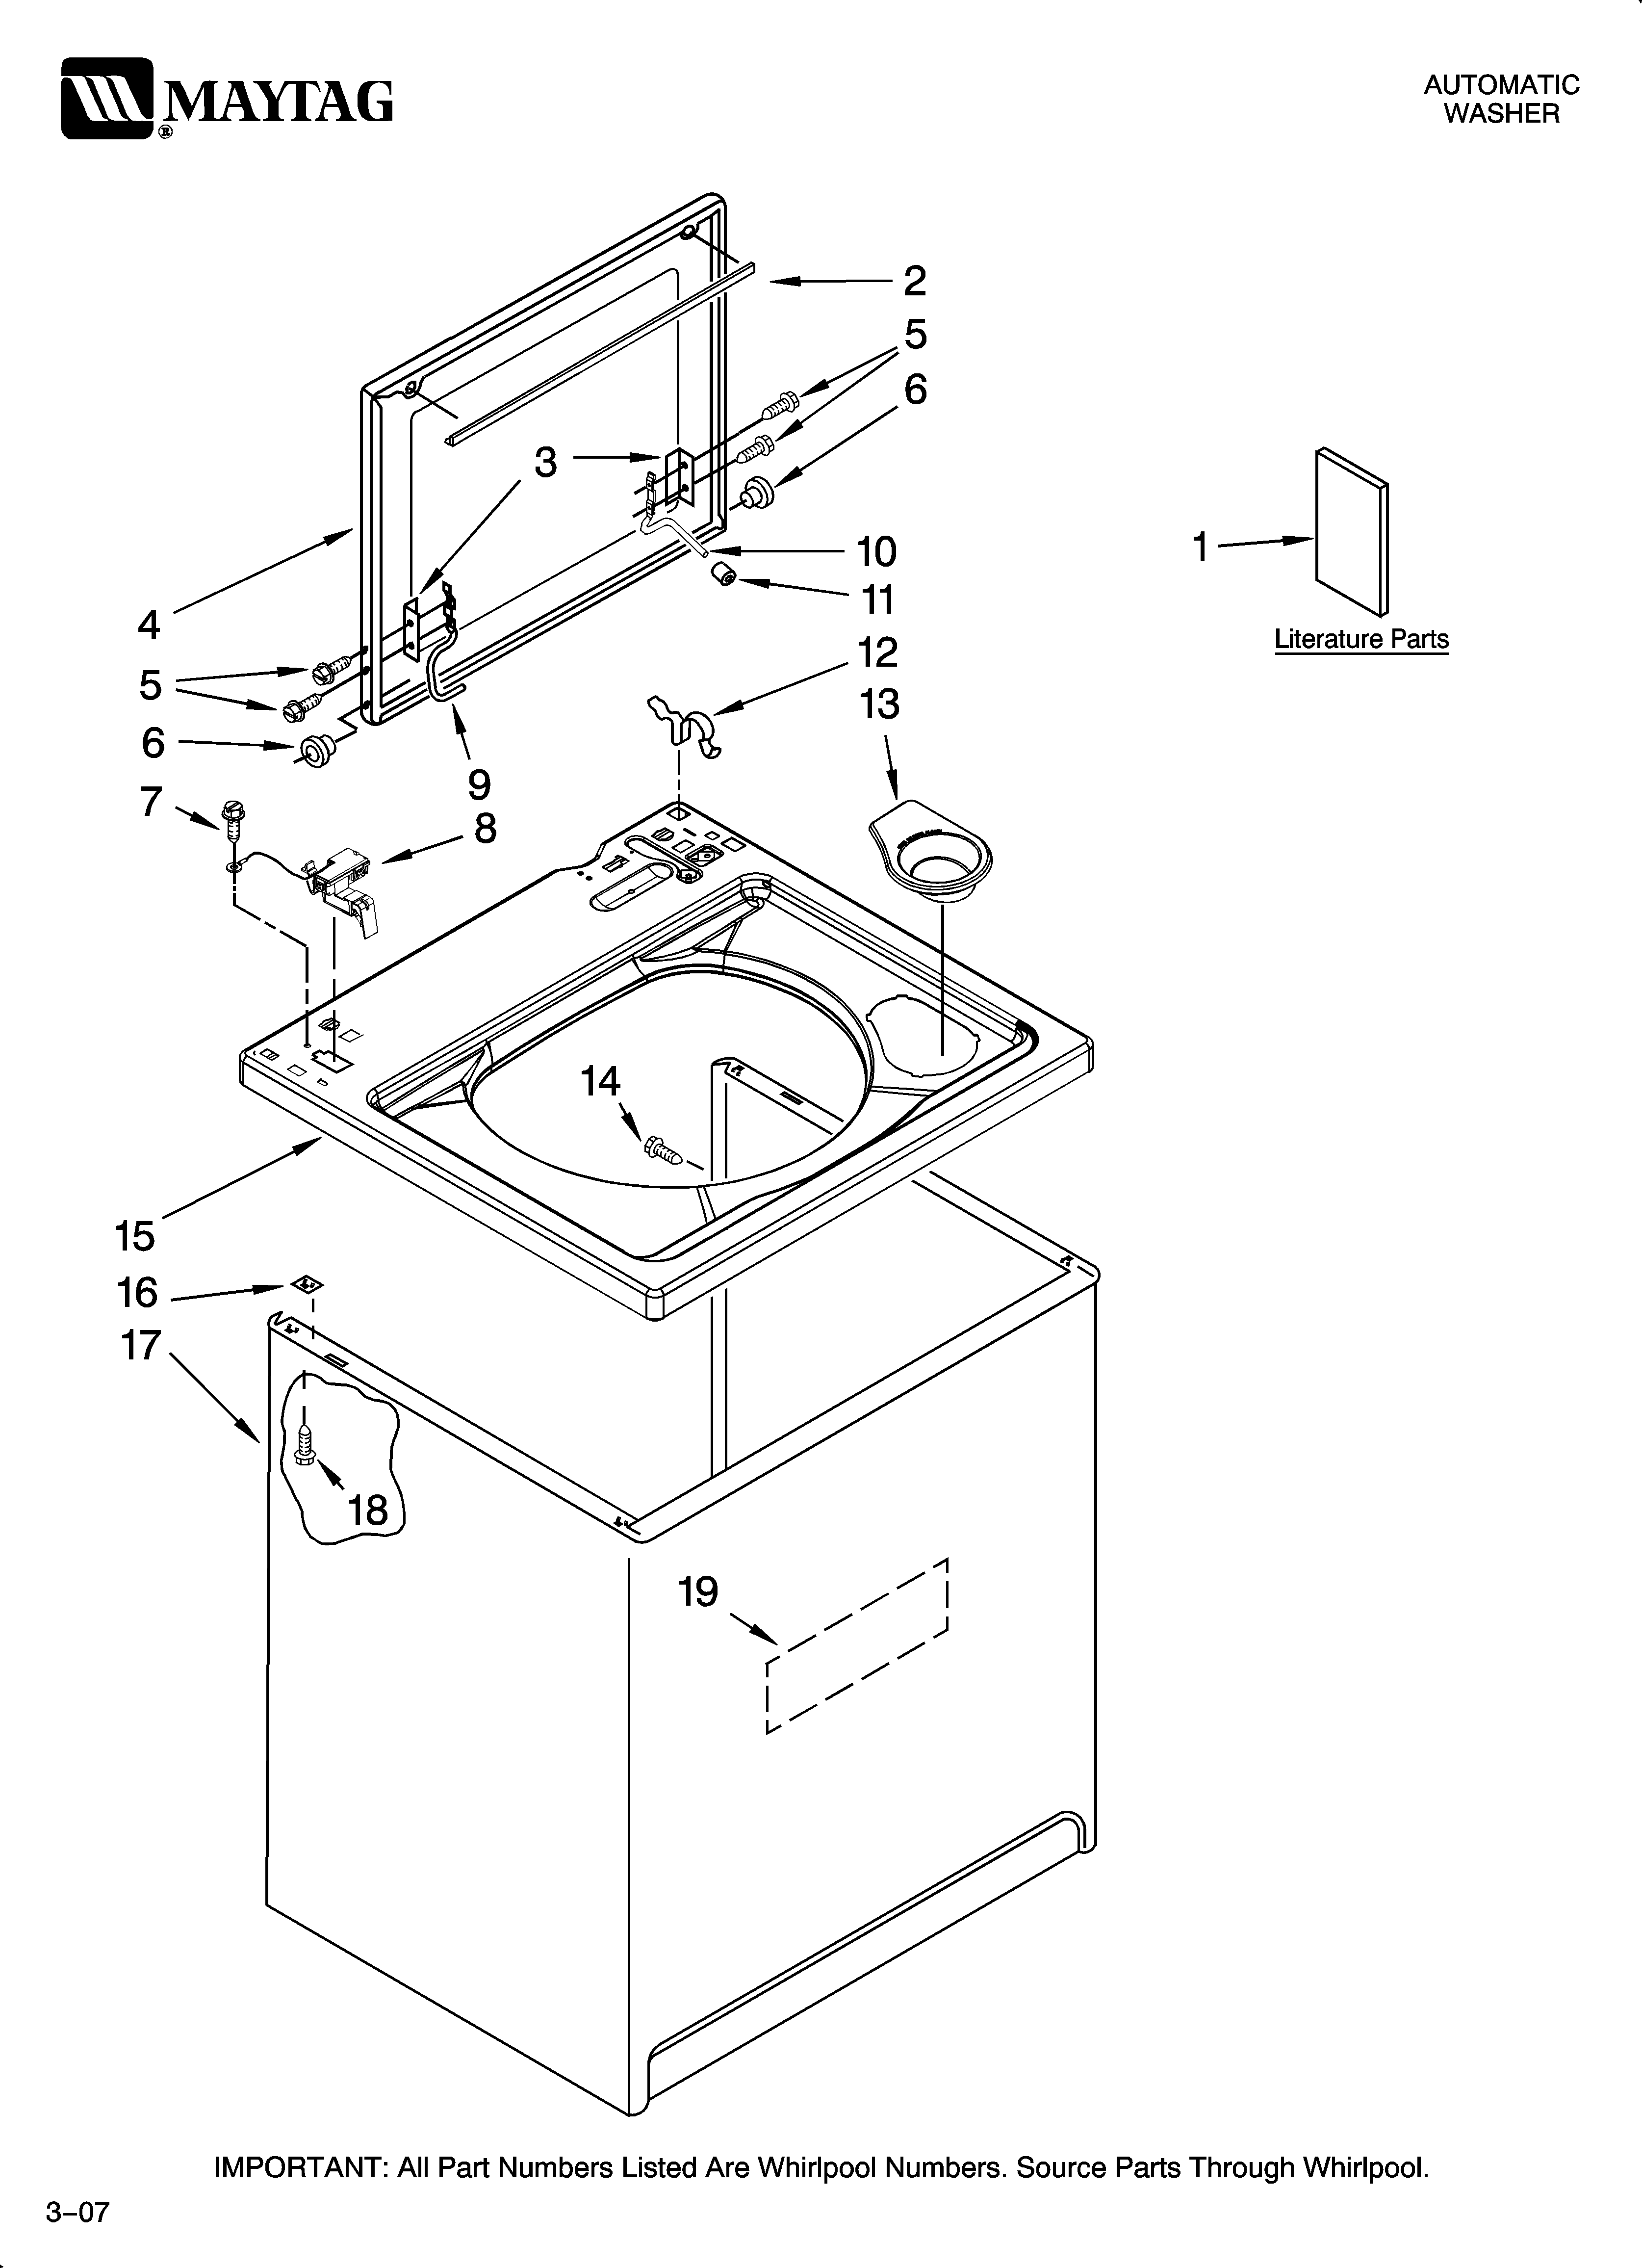 Maytag Residential Washer Parts